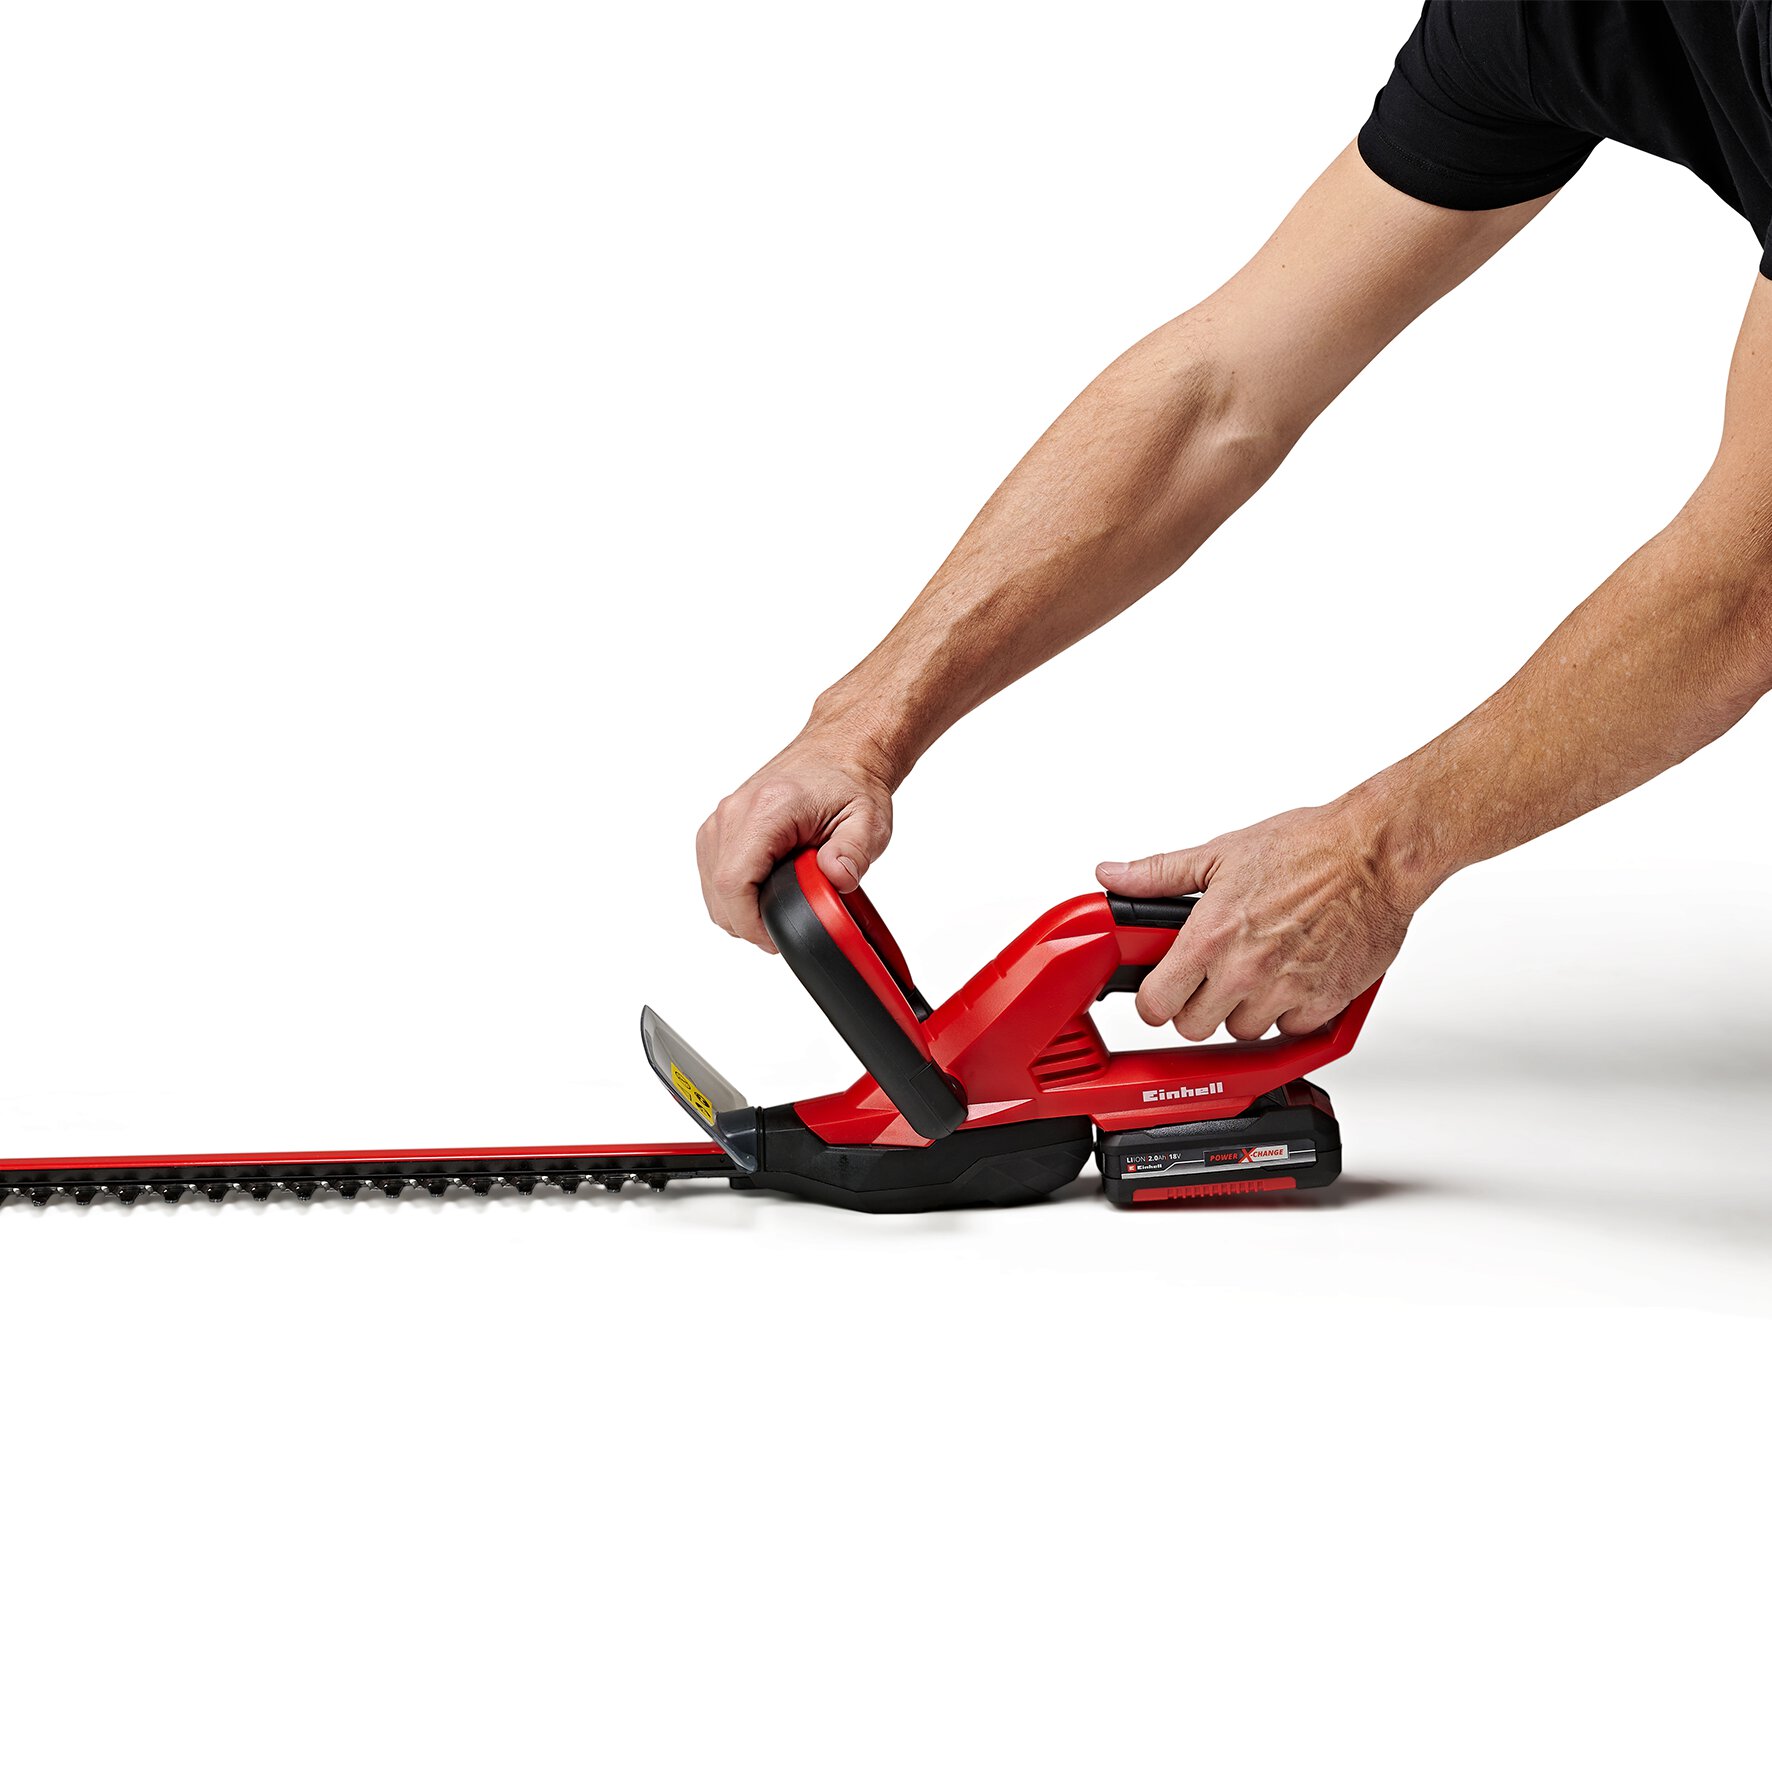 einhell-classic-cordless-hedge-trimmer-3410642-detail_image-001